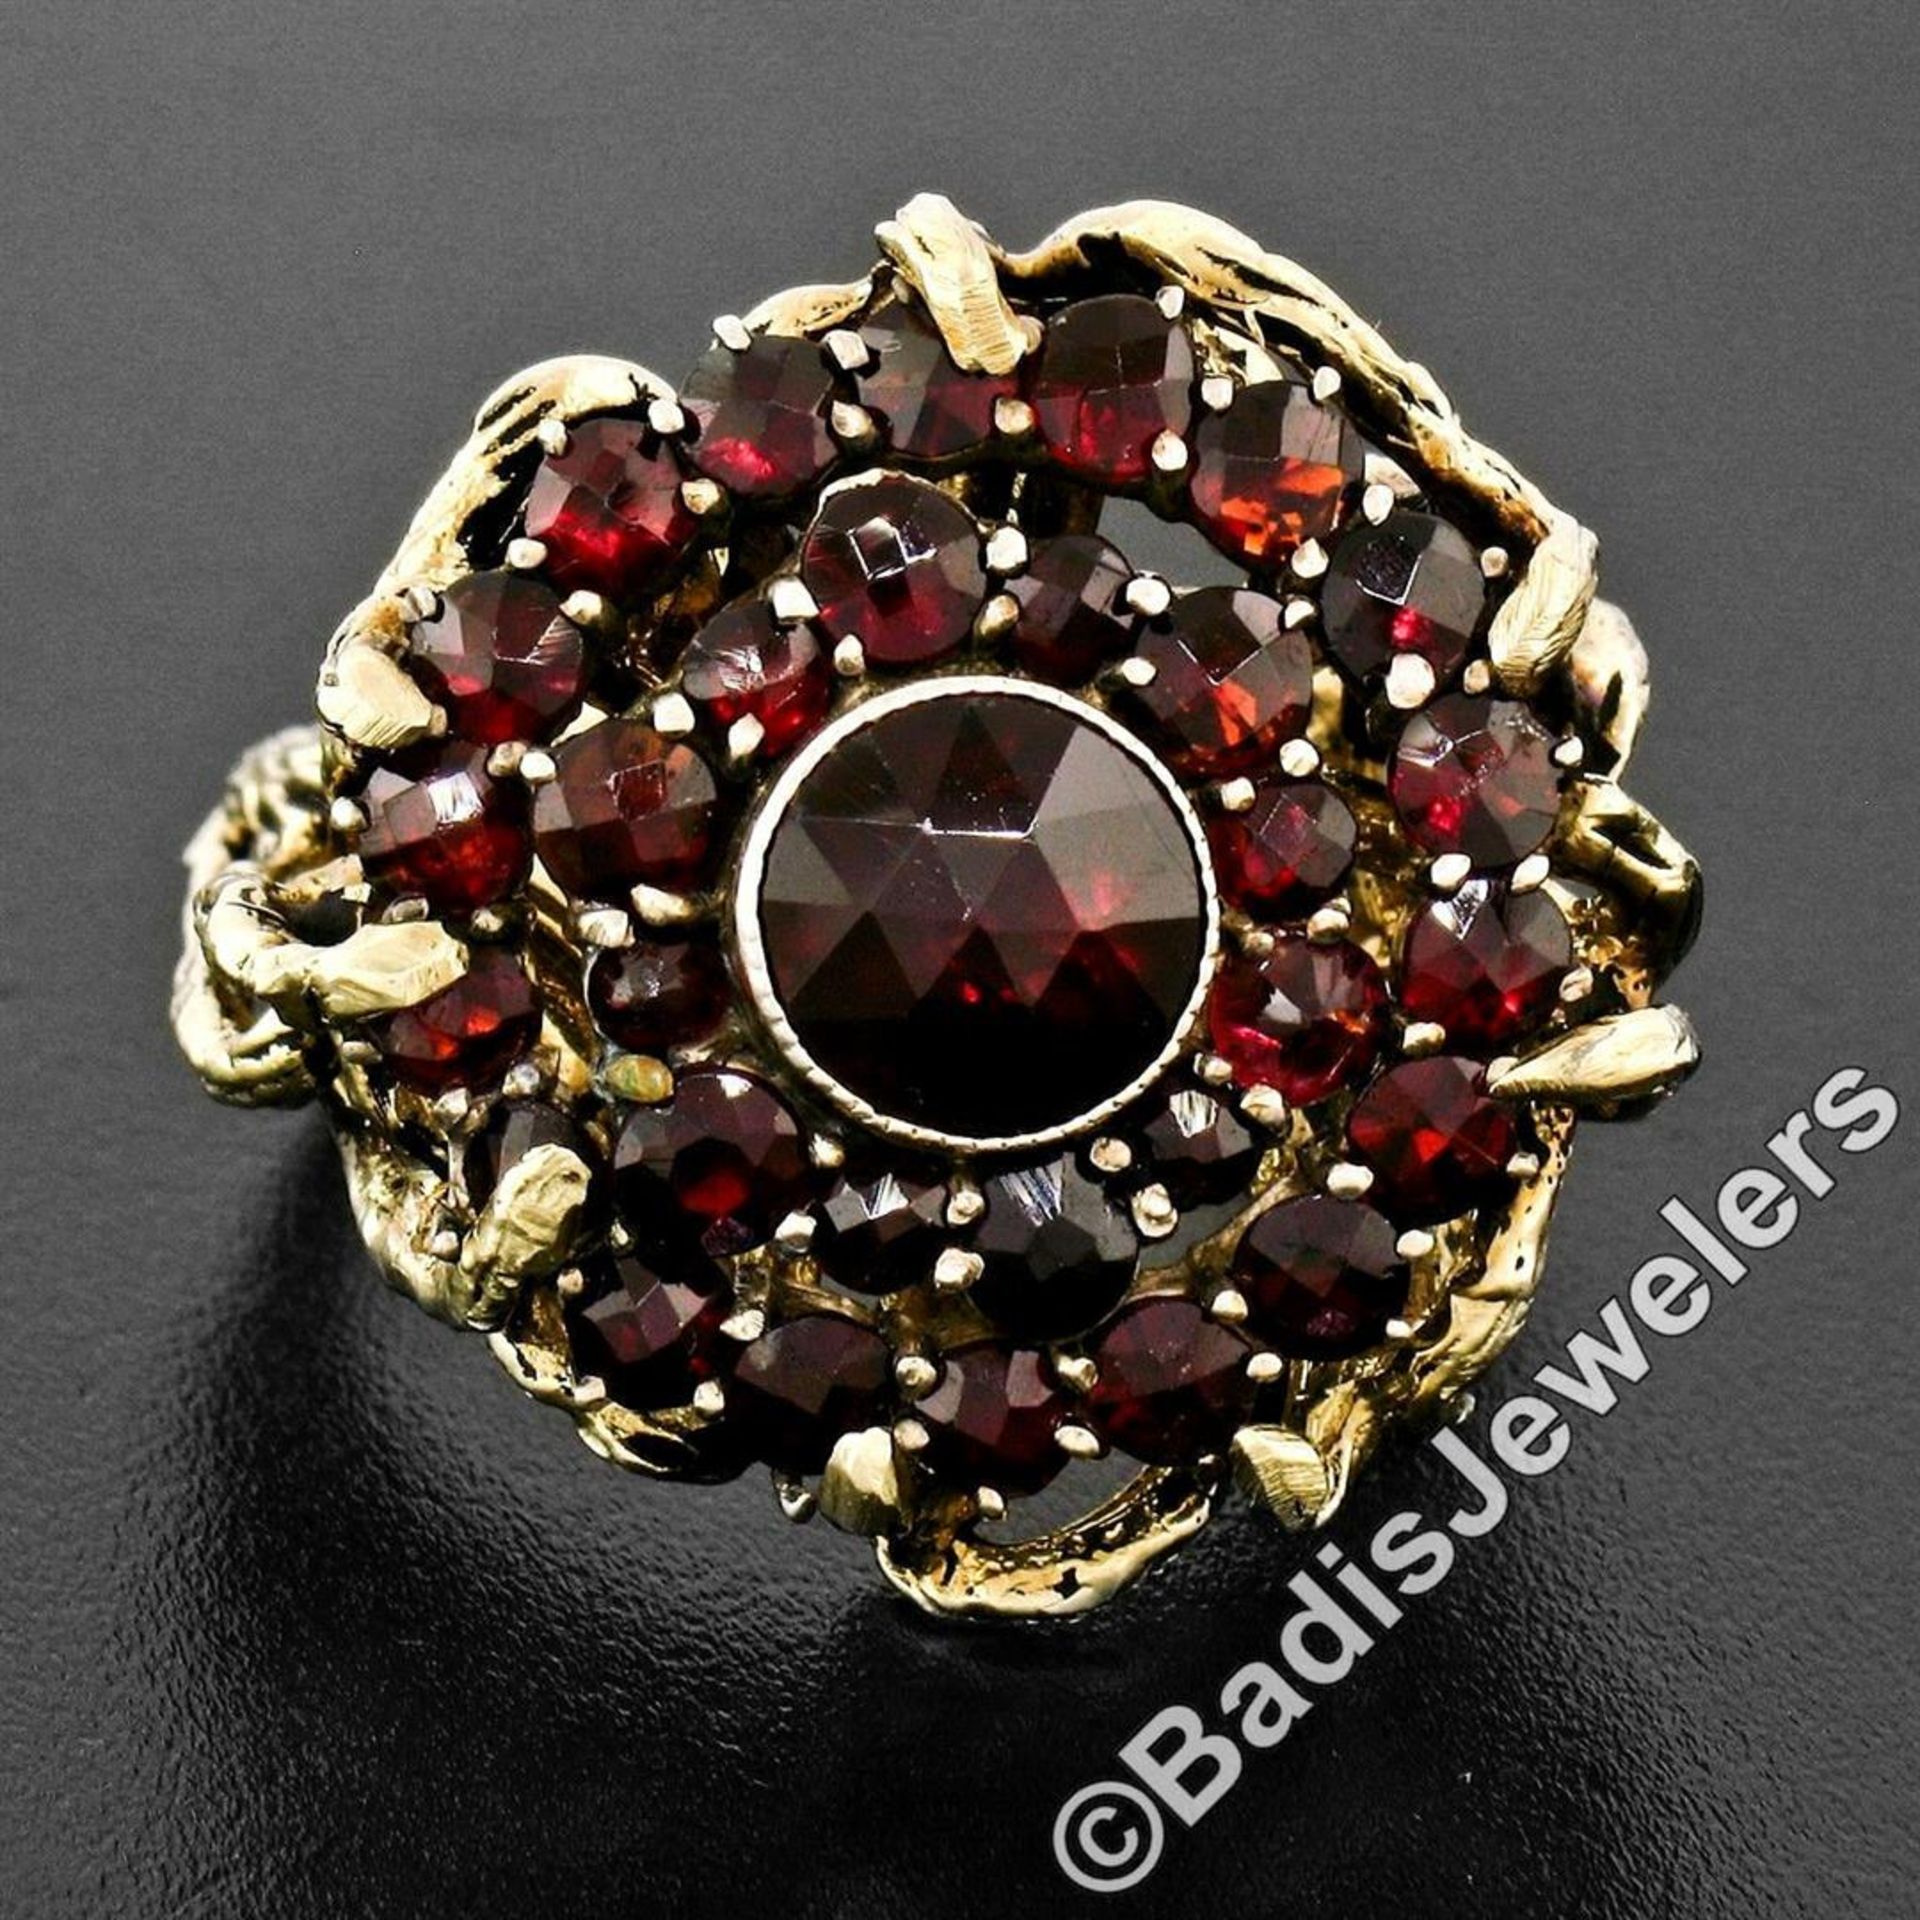 Vintage 14kt Yellow Gold and Silver Top Old Cut Garnet Cluster Ring - Image 2 of 9